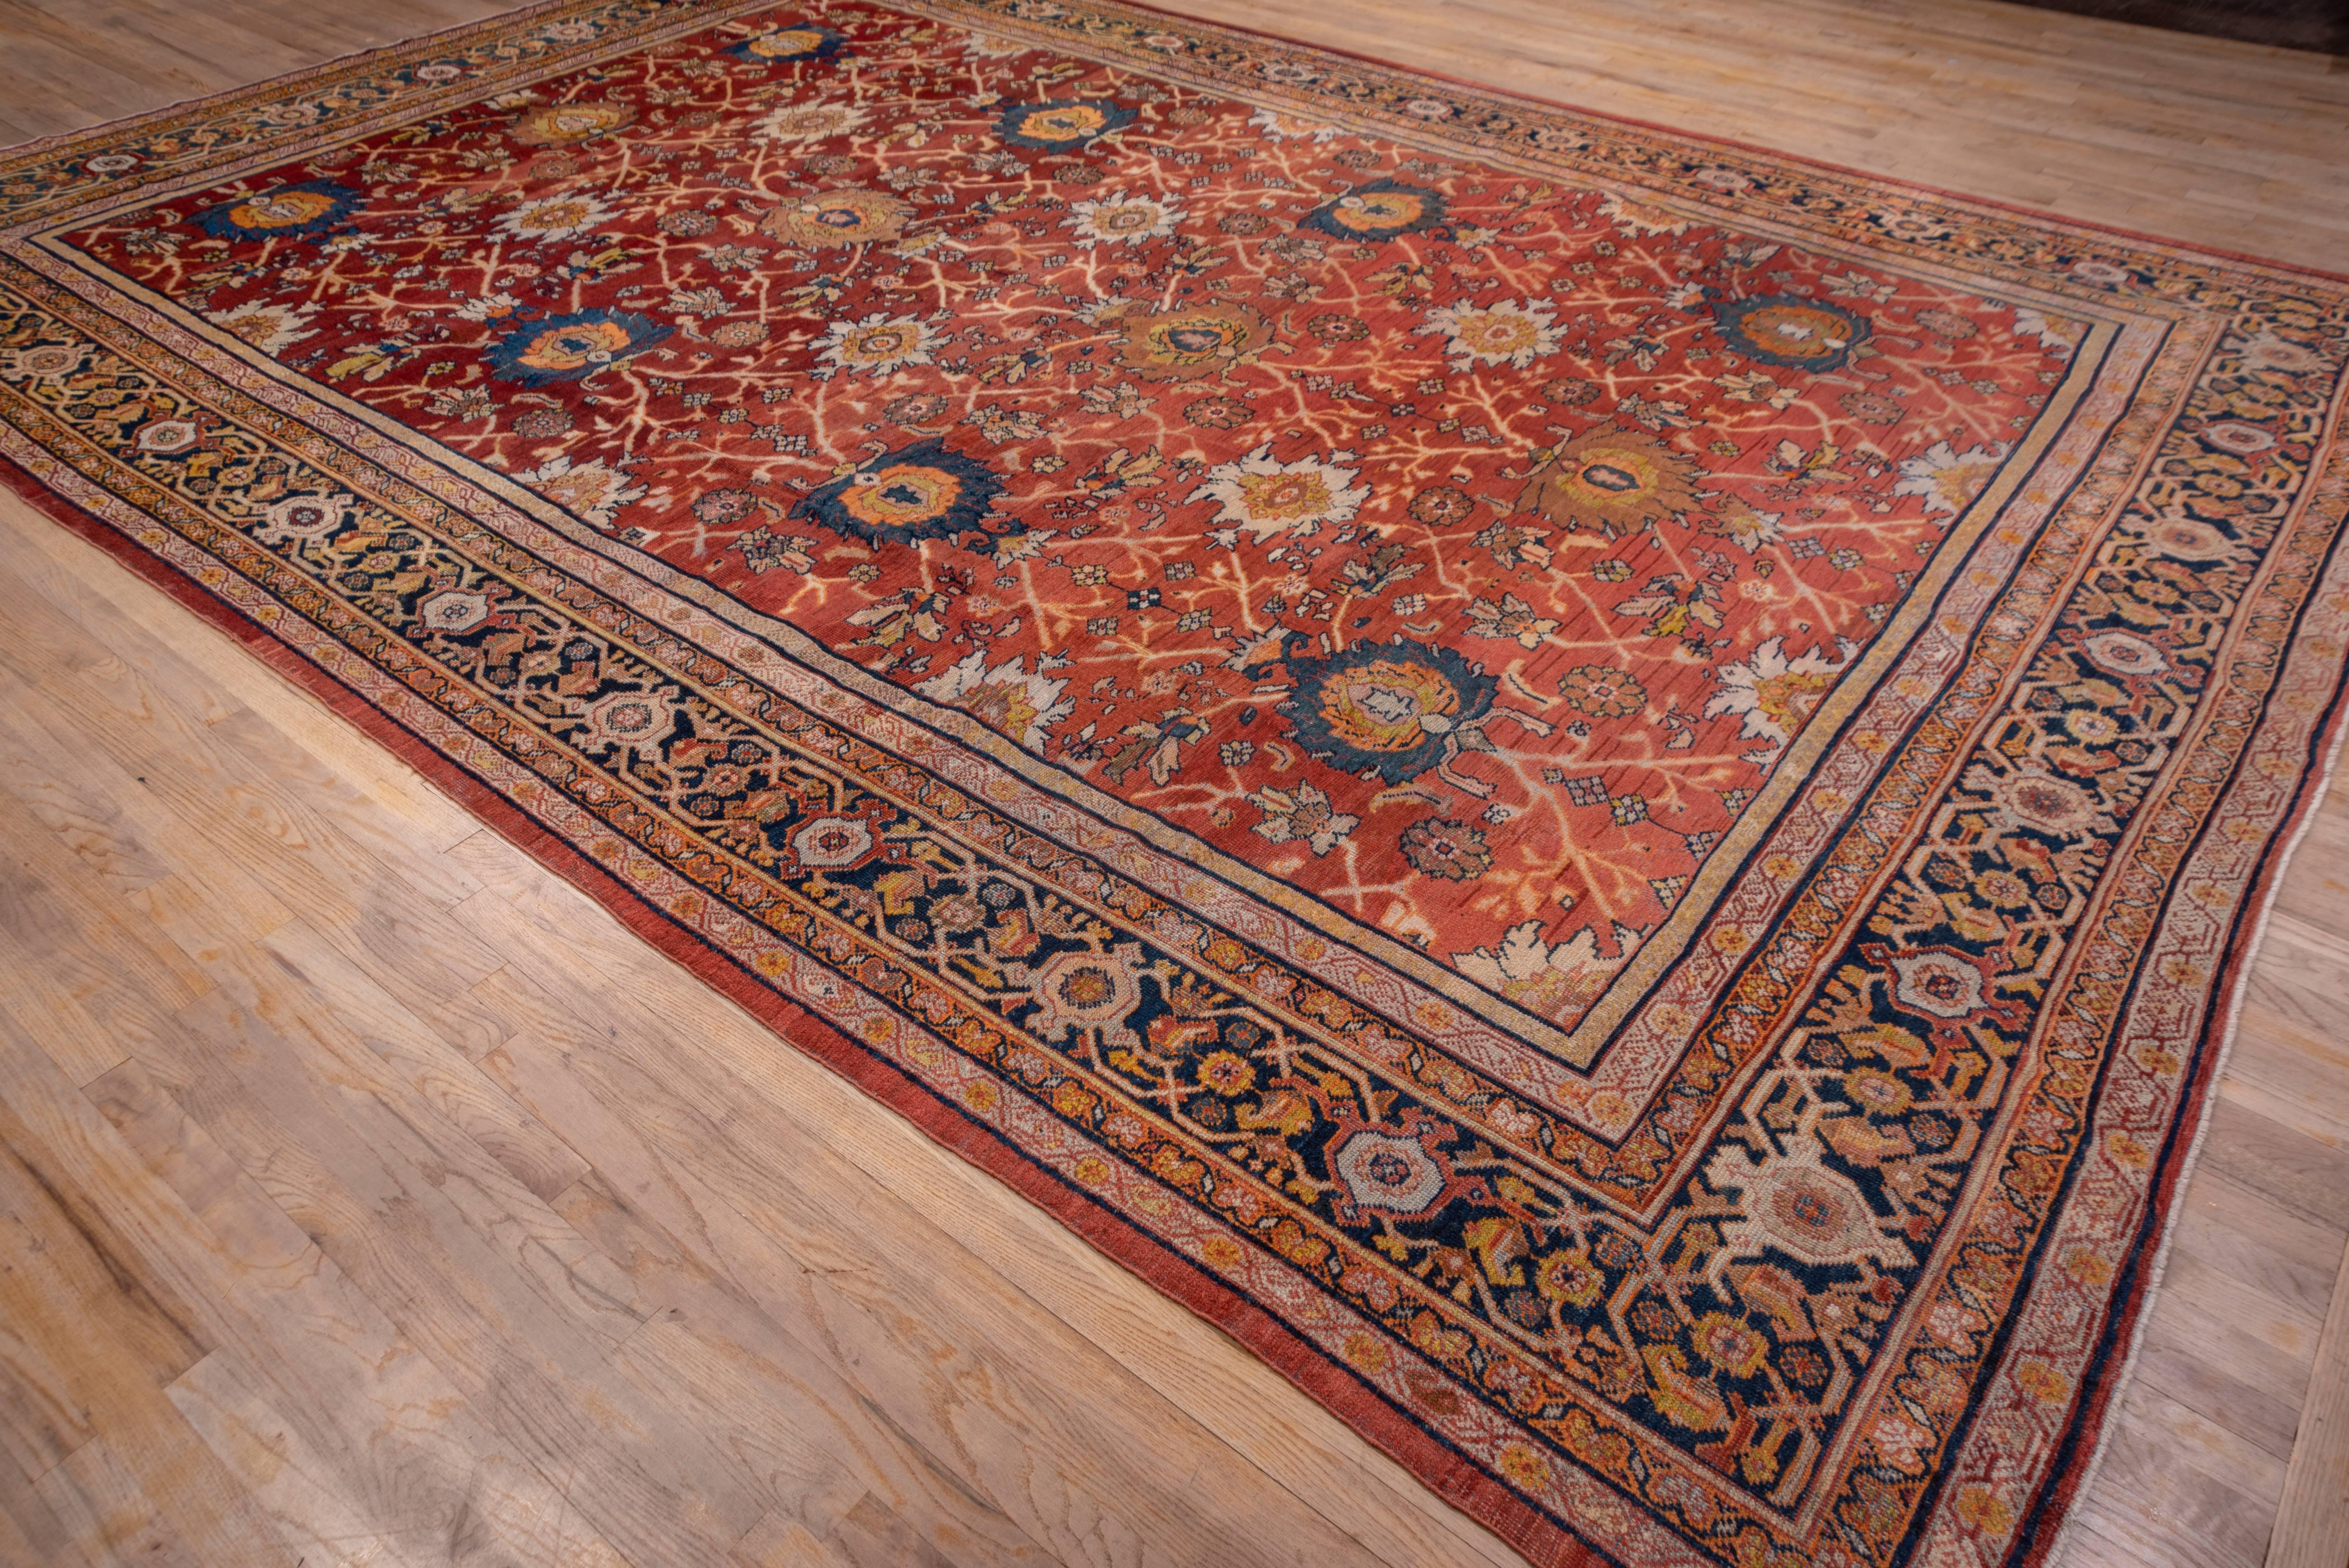 Wool Antique Red Persian Mahal Carpet For Sale